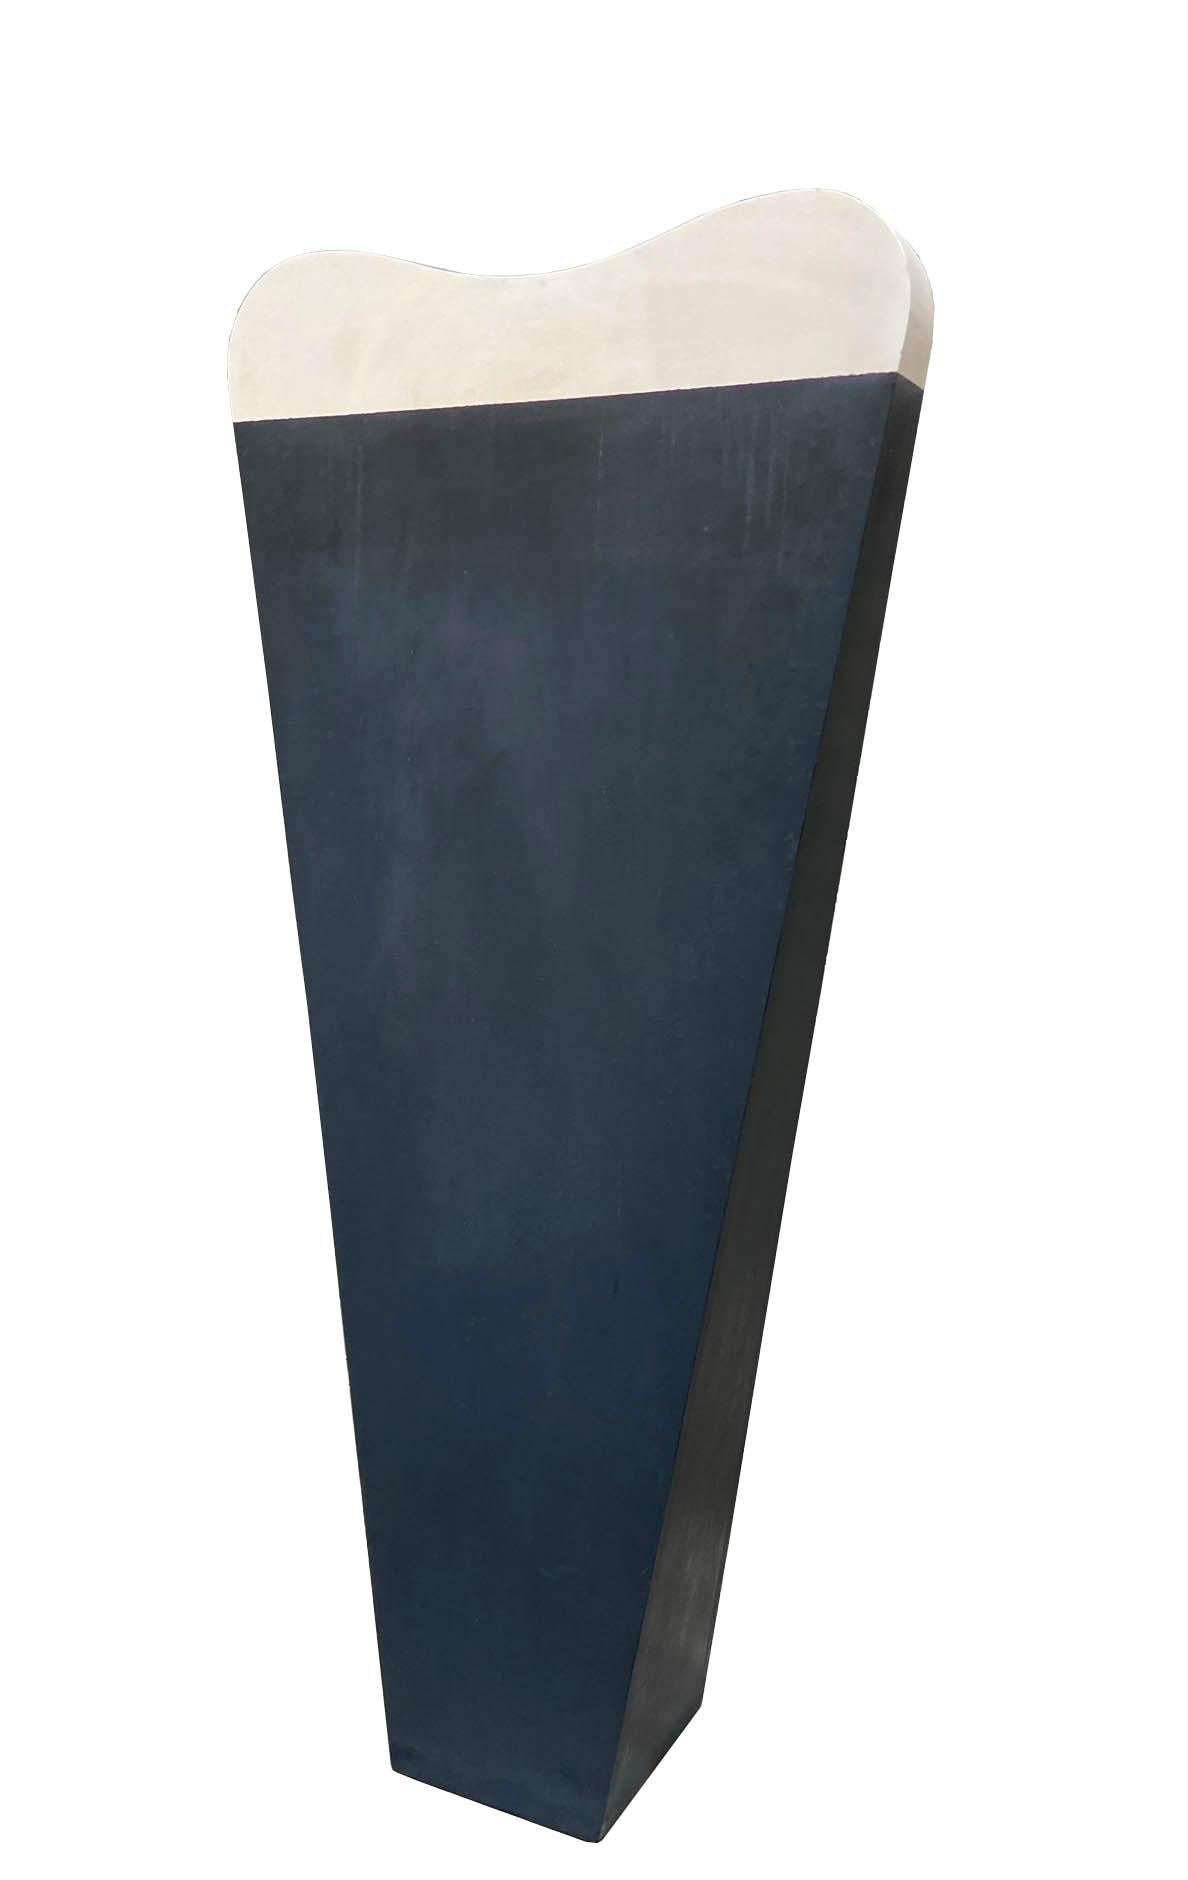 Lacquered wood sculpture made by the artist Michele Zaza in the 1990s.
Michele Zaza was born in Molfetta (Puglia) on 7 November 1948. 
After attending the Institute of Fine Arts in Bari, he moved to Milan to follow Marino Marini's sculpture course